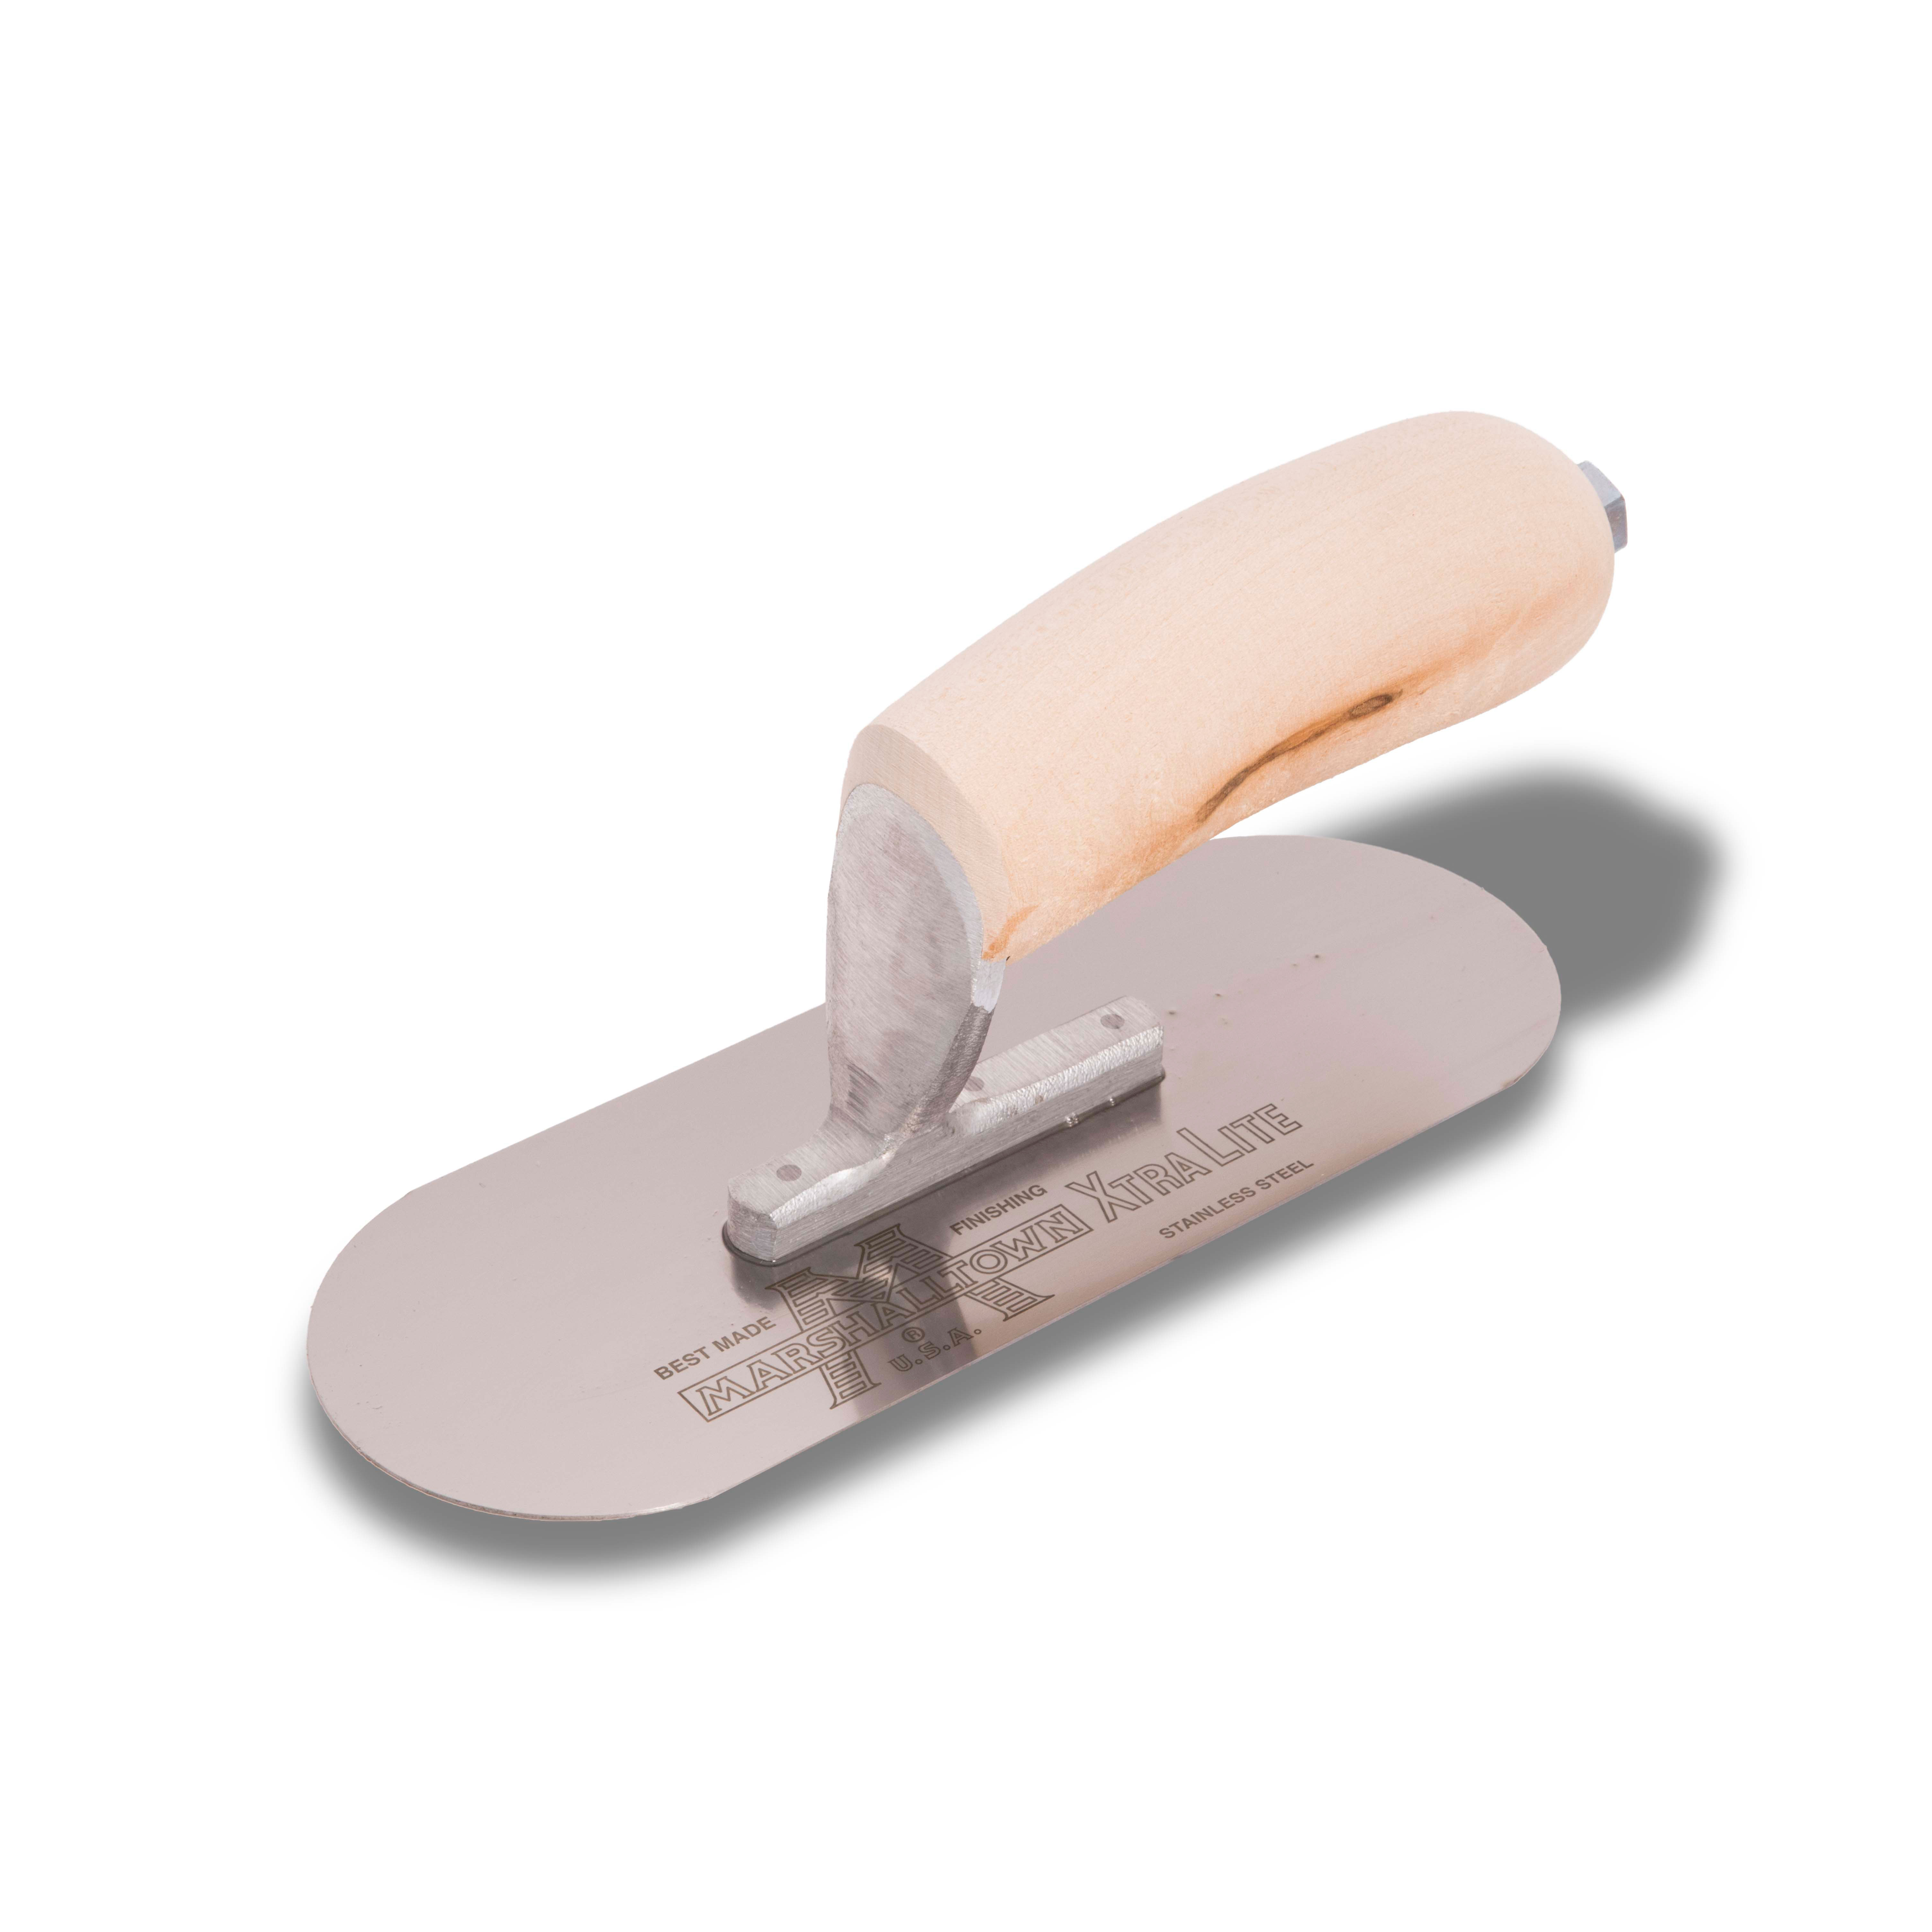 Marshalltown SP83SSR3 8in x 3in Pool Trowel with Exposed Rivet Trowels and Wood Handle SP83SSR3